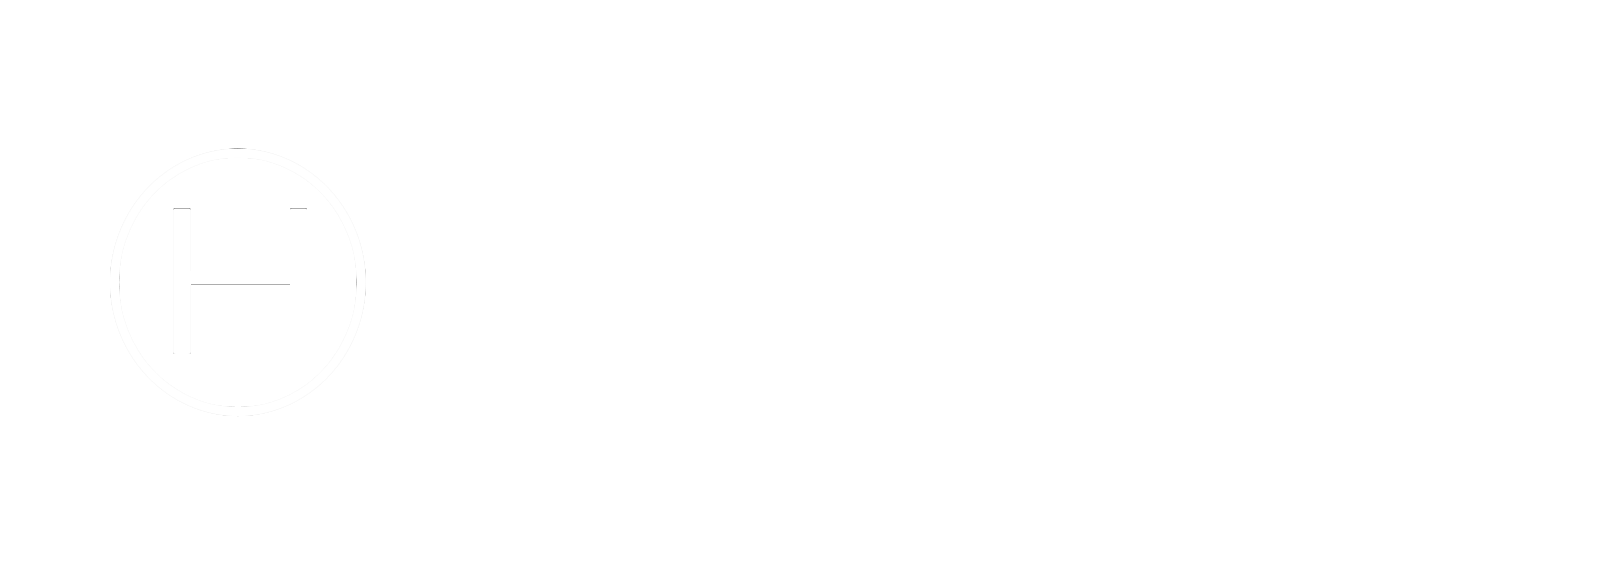 HELICENTRAS